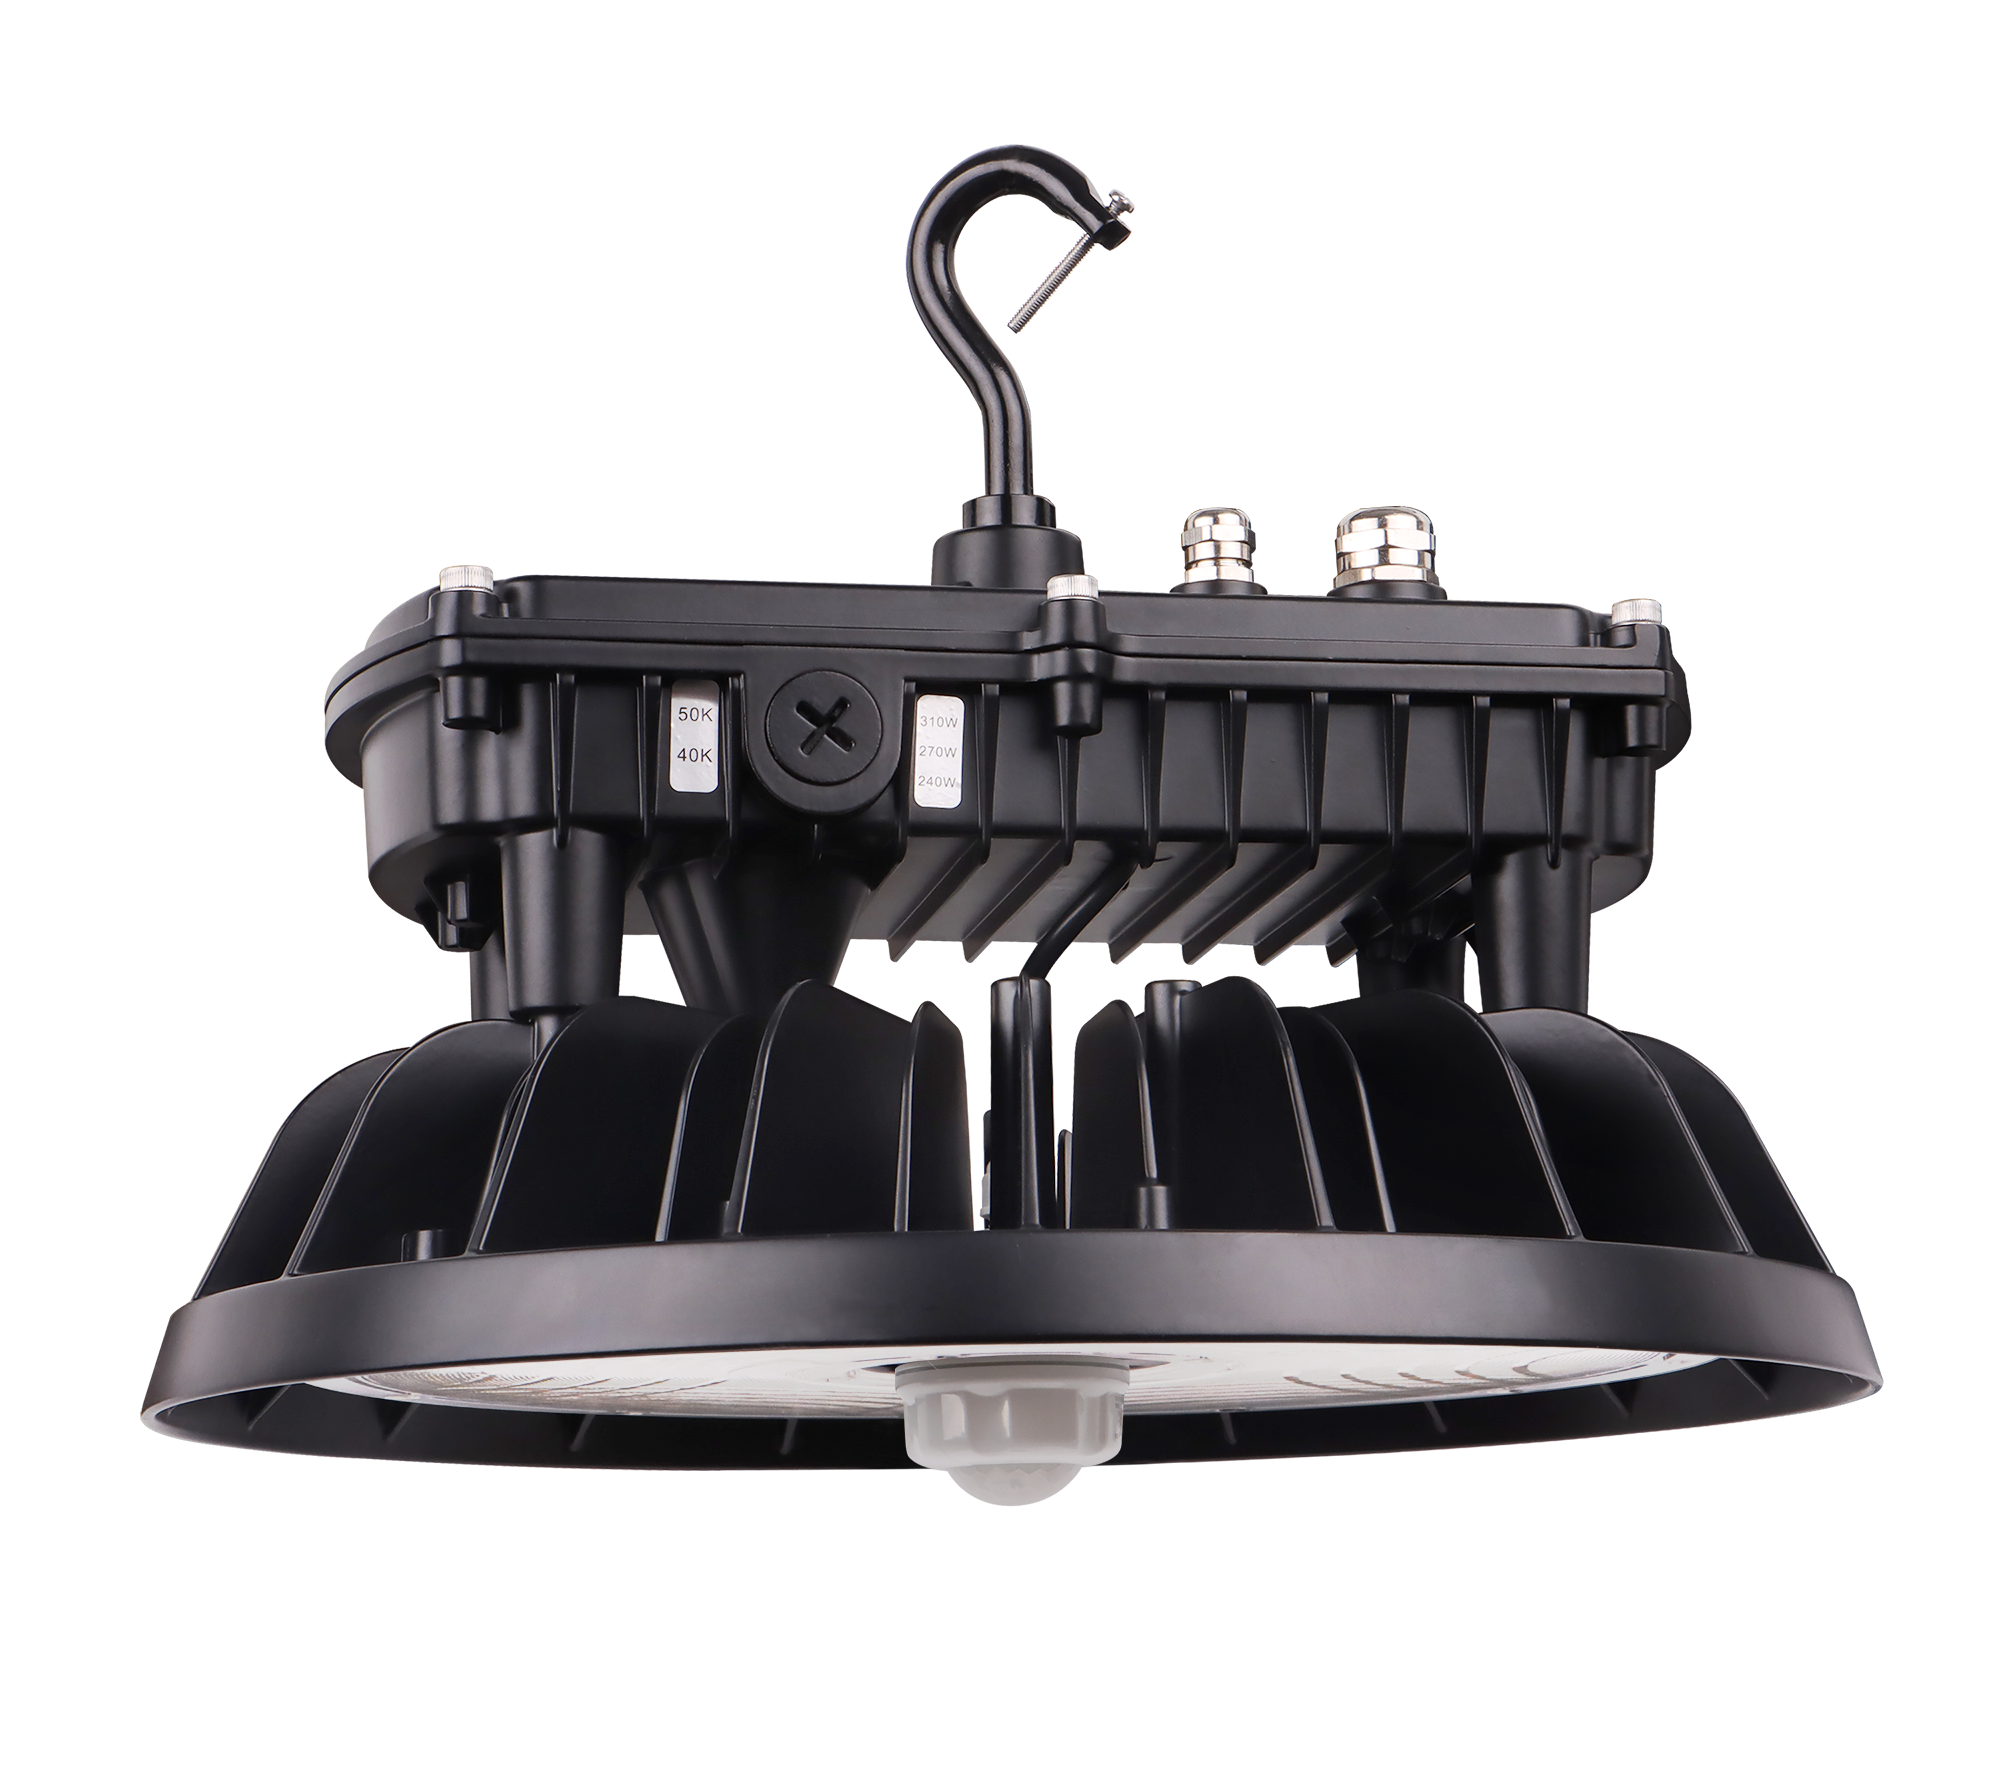 310W Tunable UFO LED High Bay Light - Selectable Wattage (310W /270W/240W) & CCT (4000K/5000K), 47,430 Lumens, 0-10V Dimmable - UL & DLC 5.1 Certified - Eco LED Lightings 